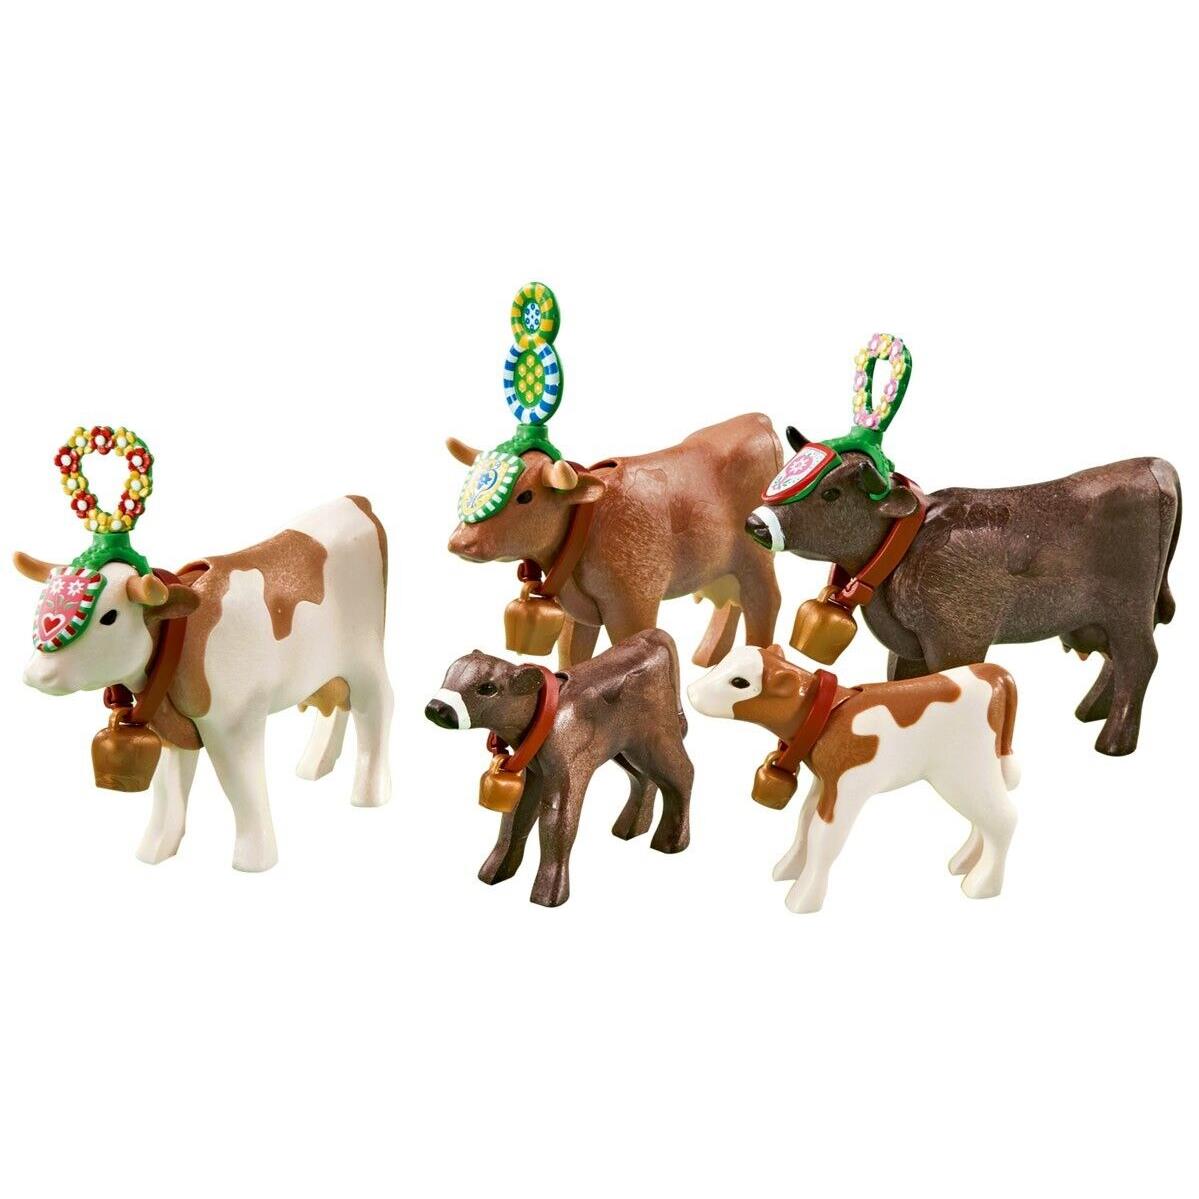 Playmobil Alpine Cow Parade Set 6535 in Package